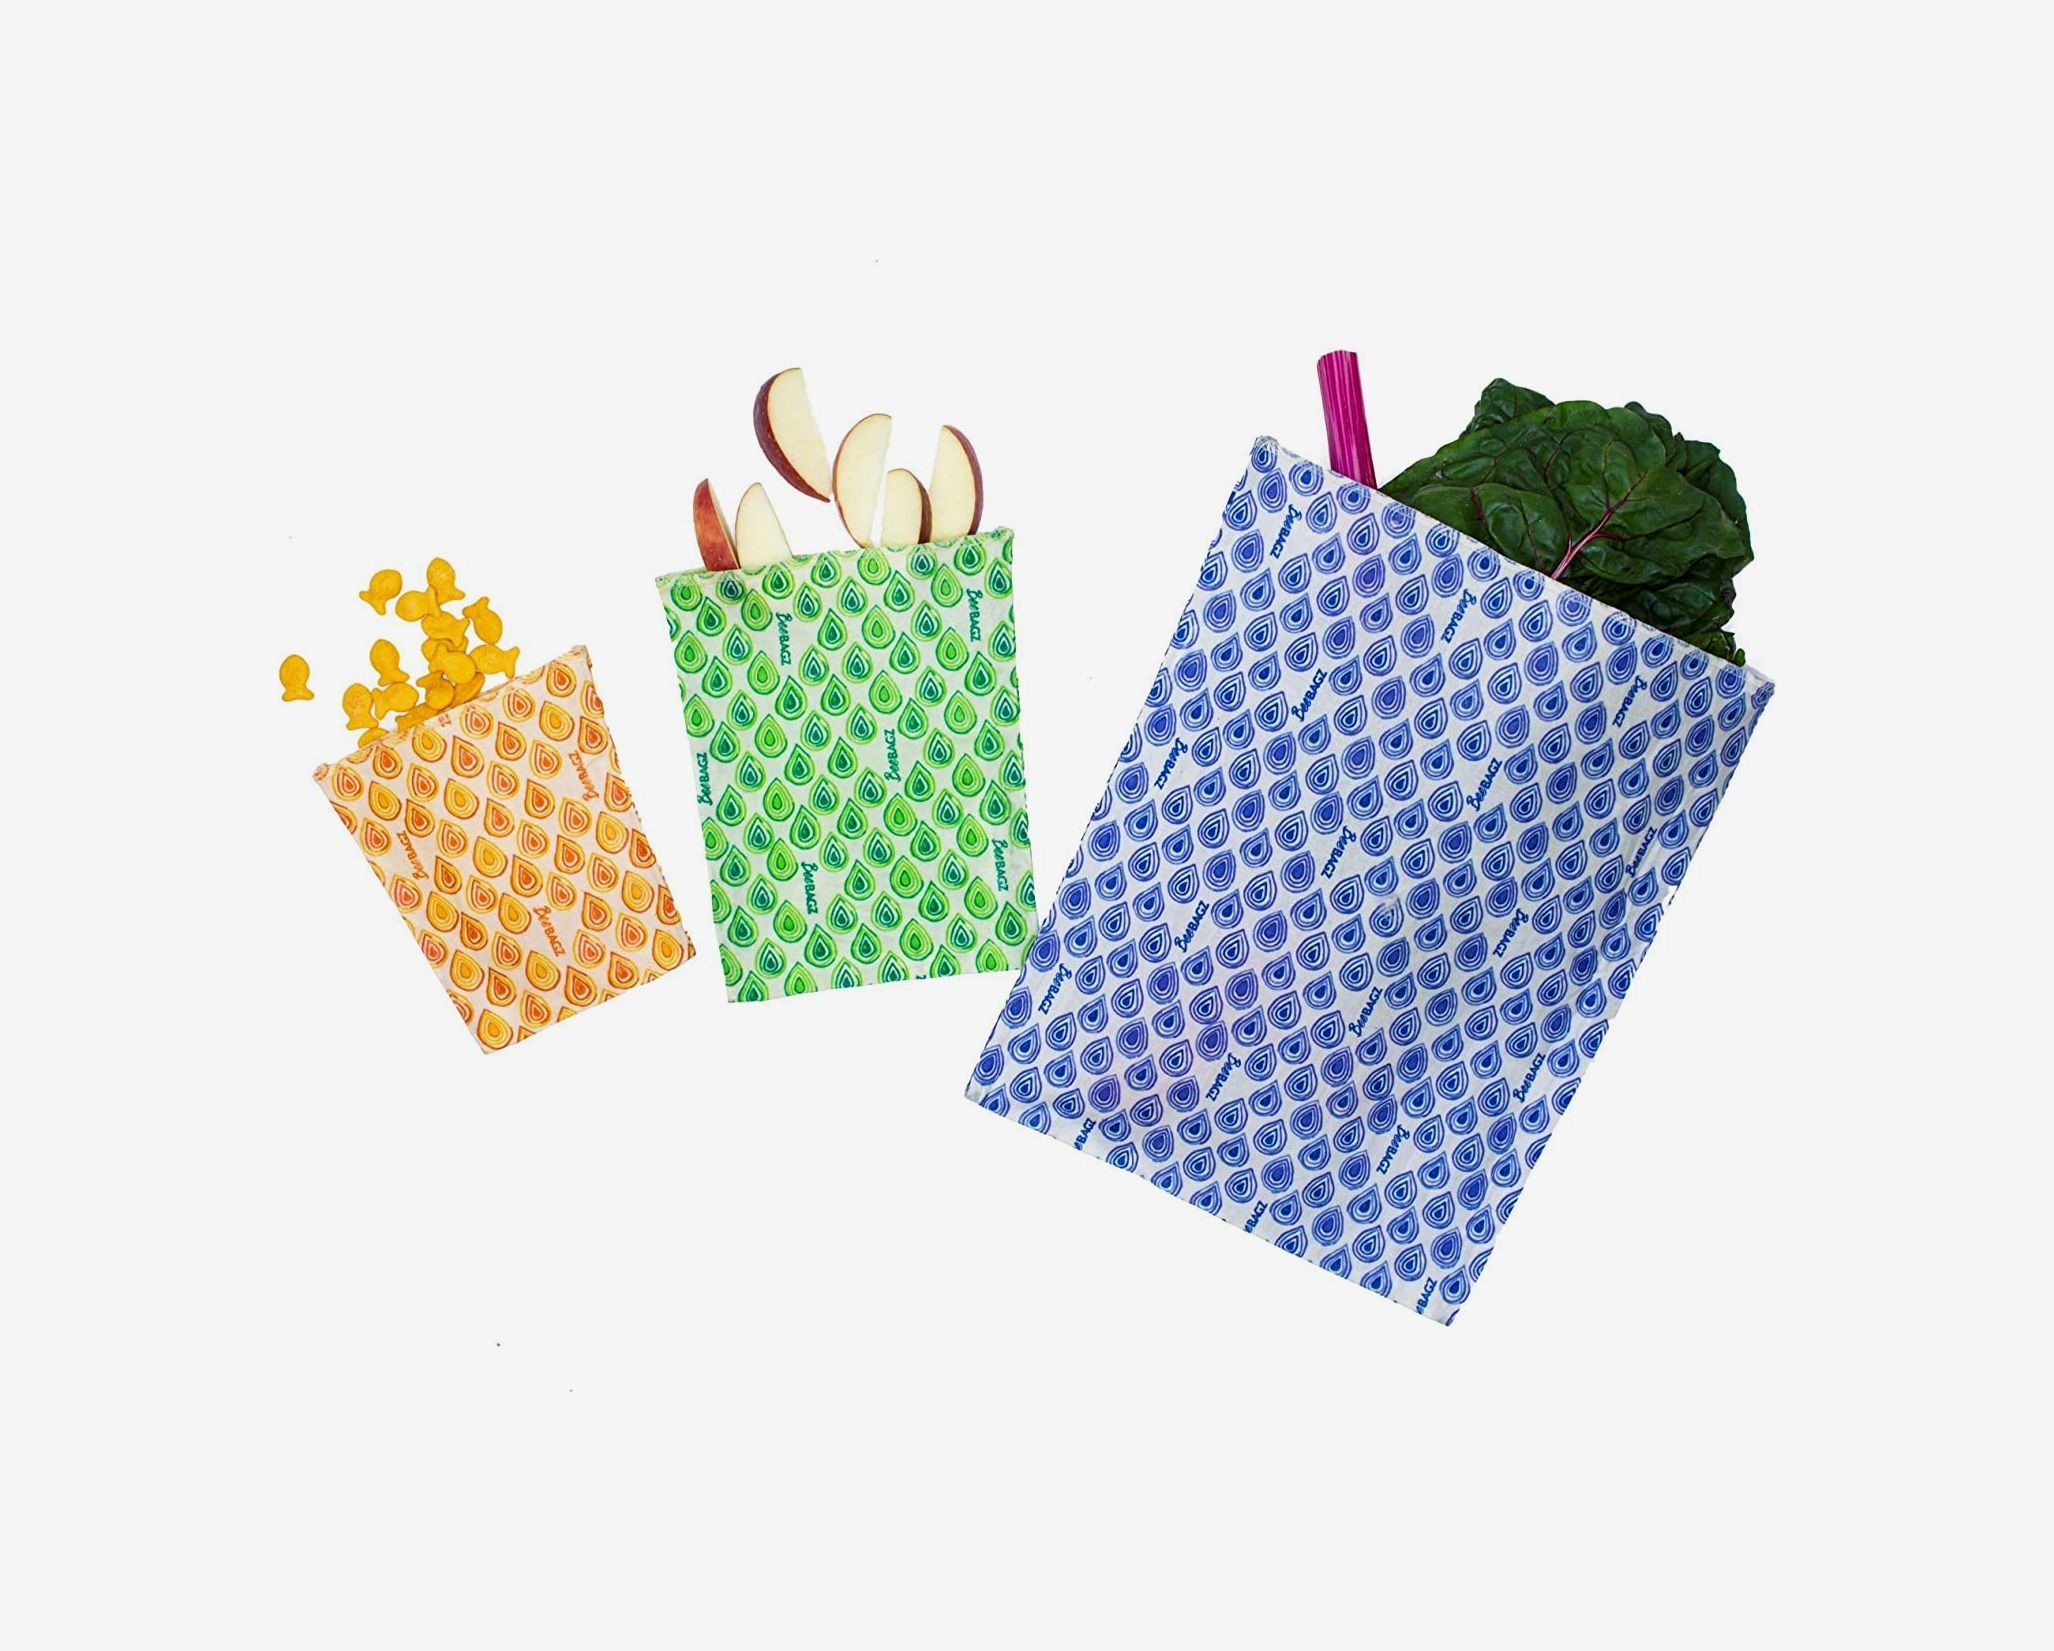 7 Best Reusable Lunch Bags – Sandwich Bags That Reduce Waste